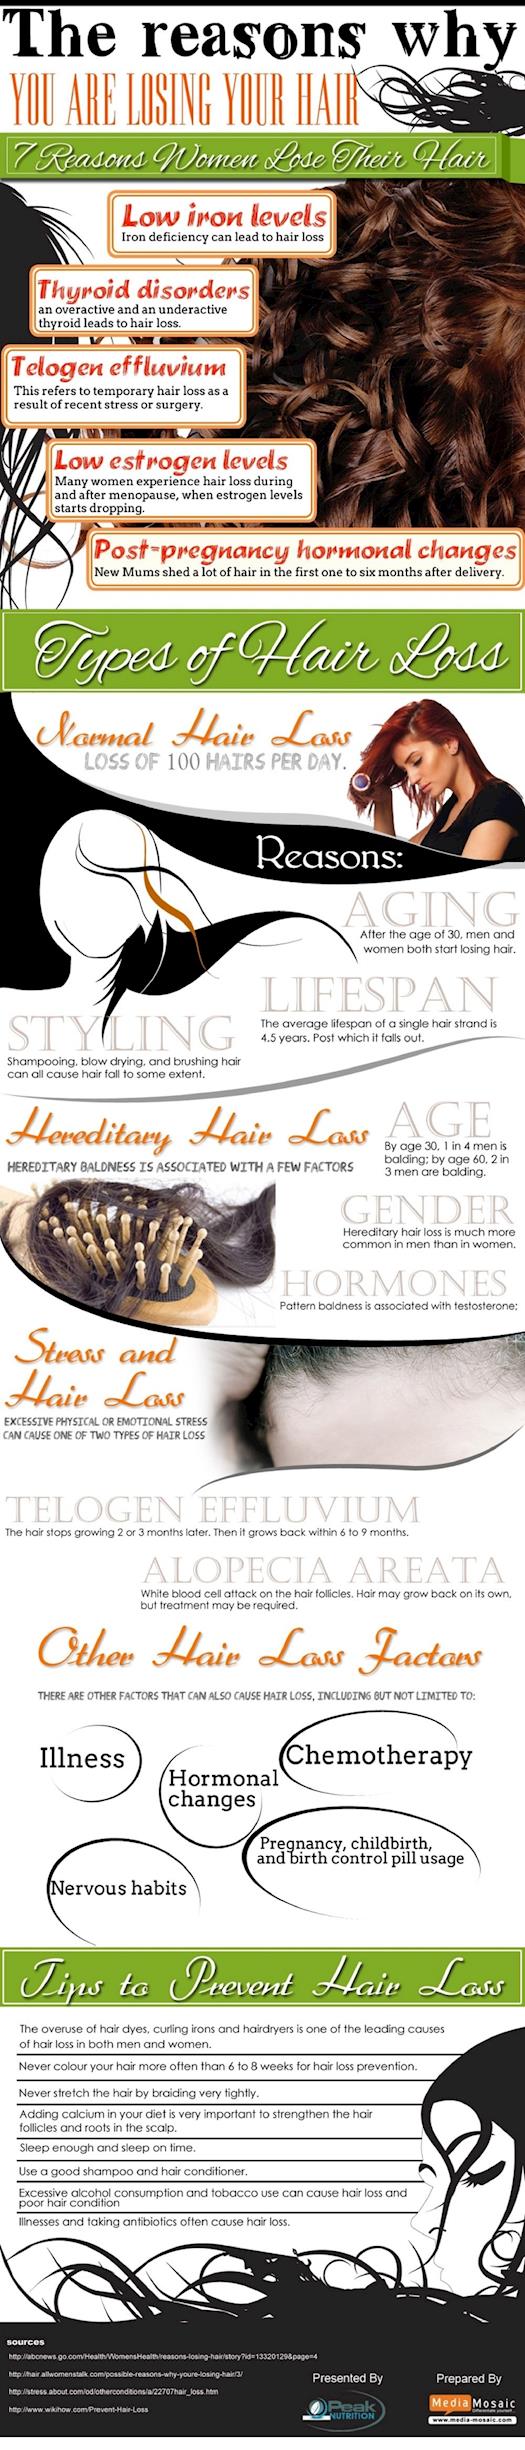 The Reasons Why You are Losing Your Hair [Infographic]